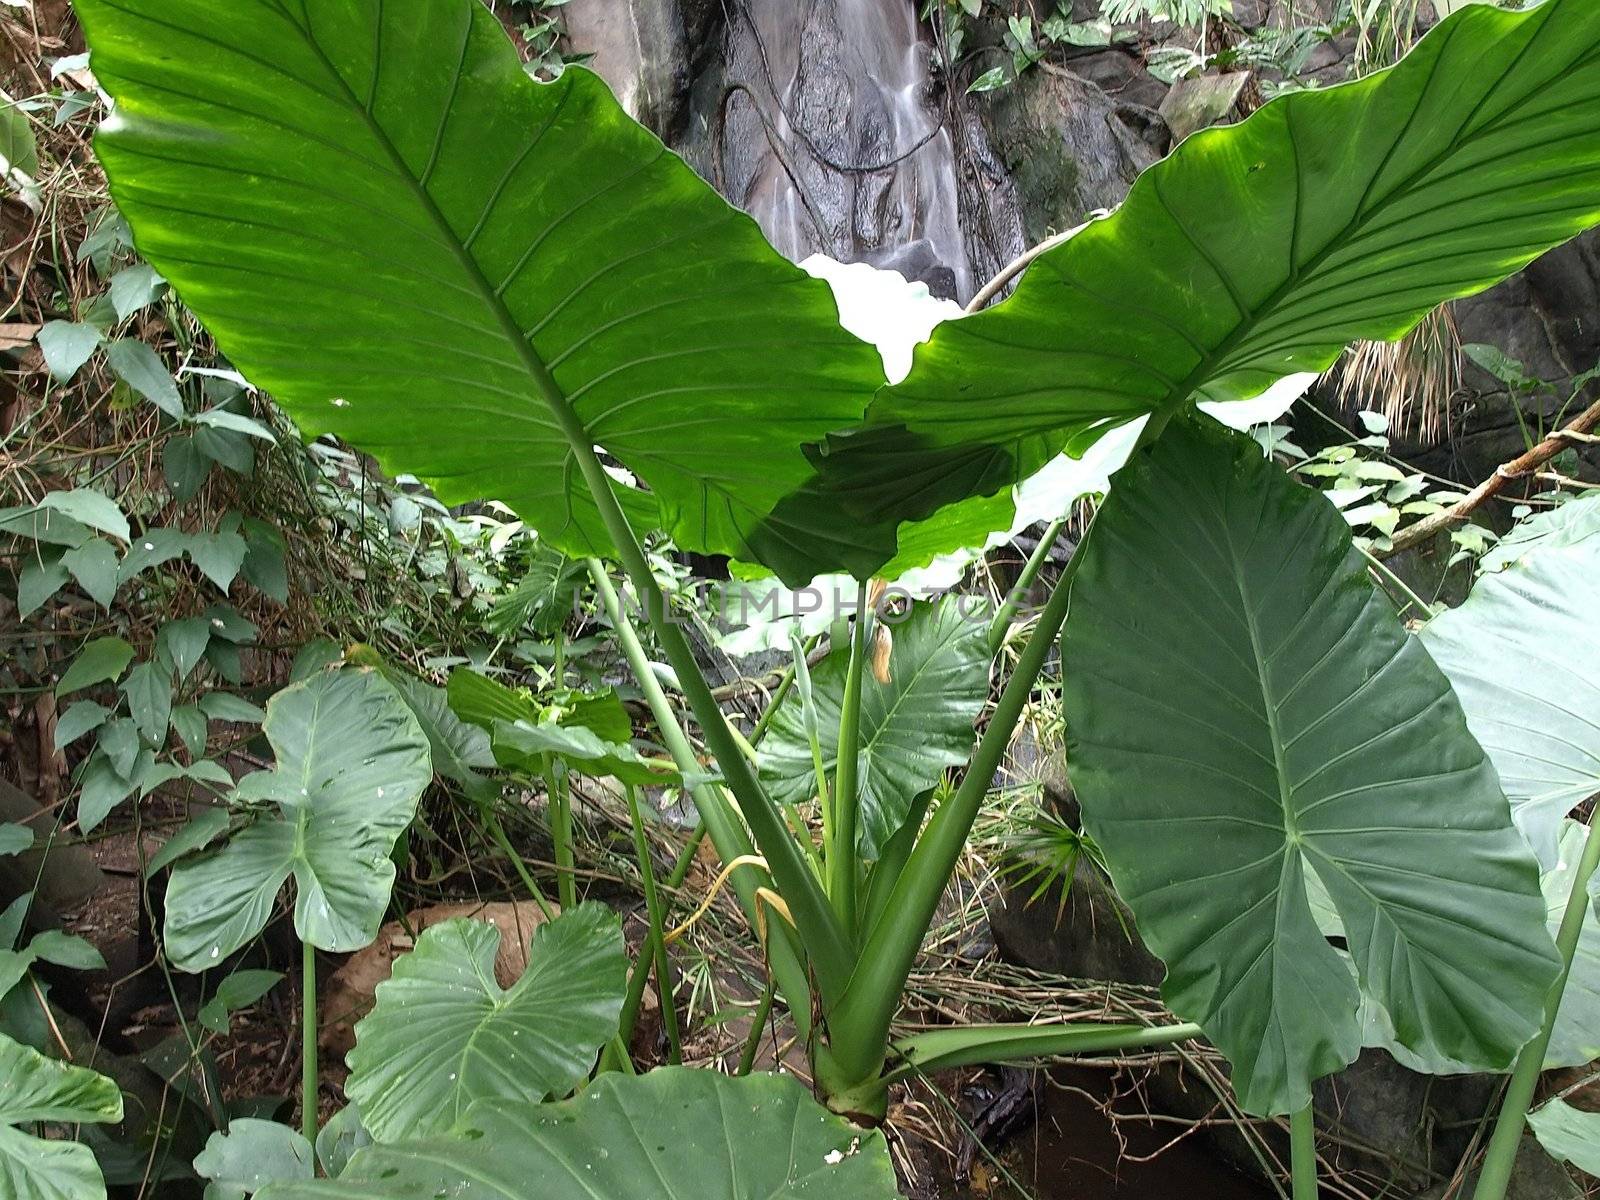 colocasia is a tropical plant native to Polynesia and Southeast Asia